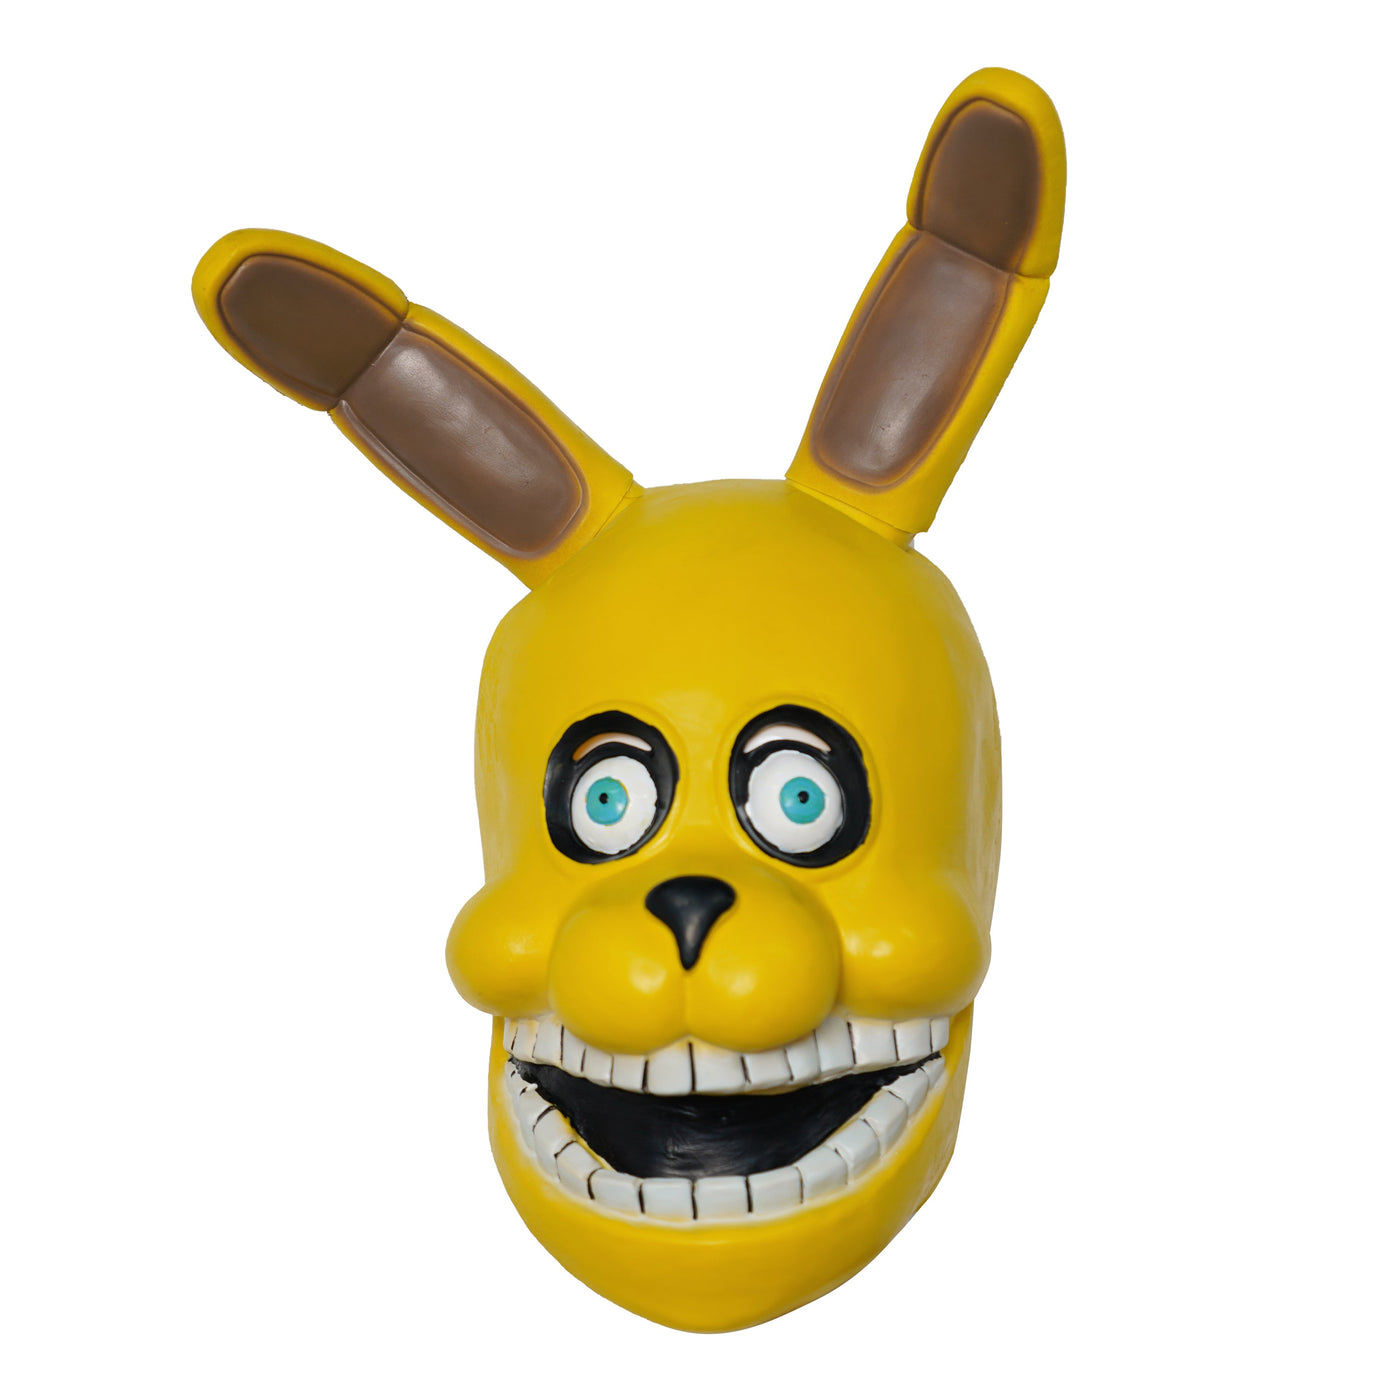 Five Nights At Freddy's Spring Bonnie Costume